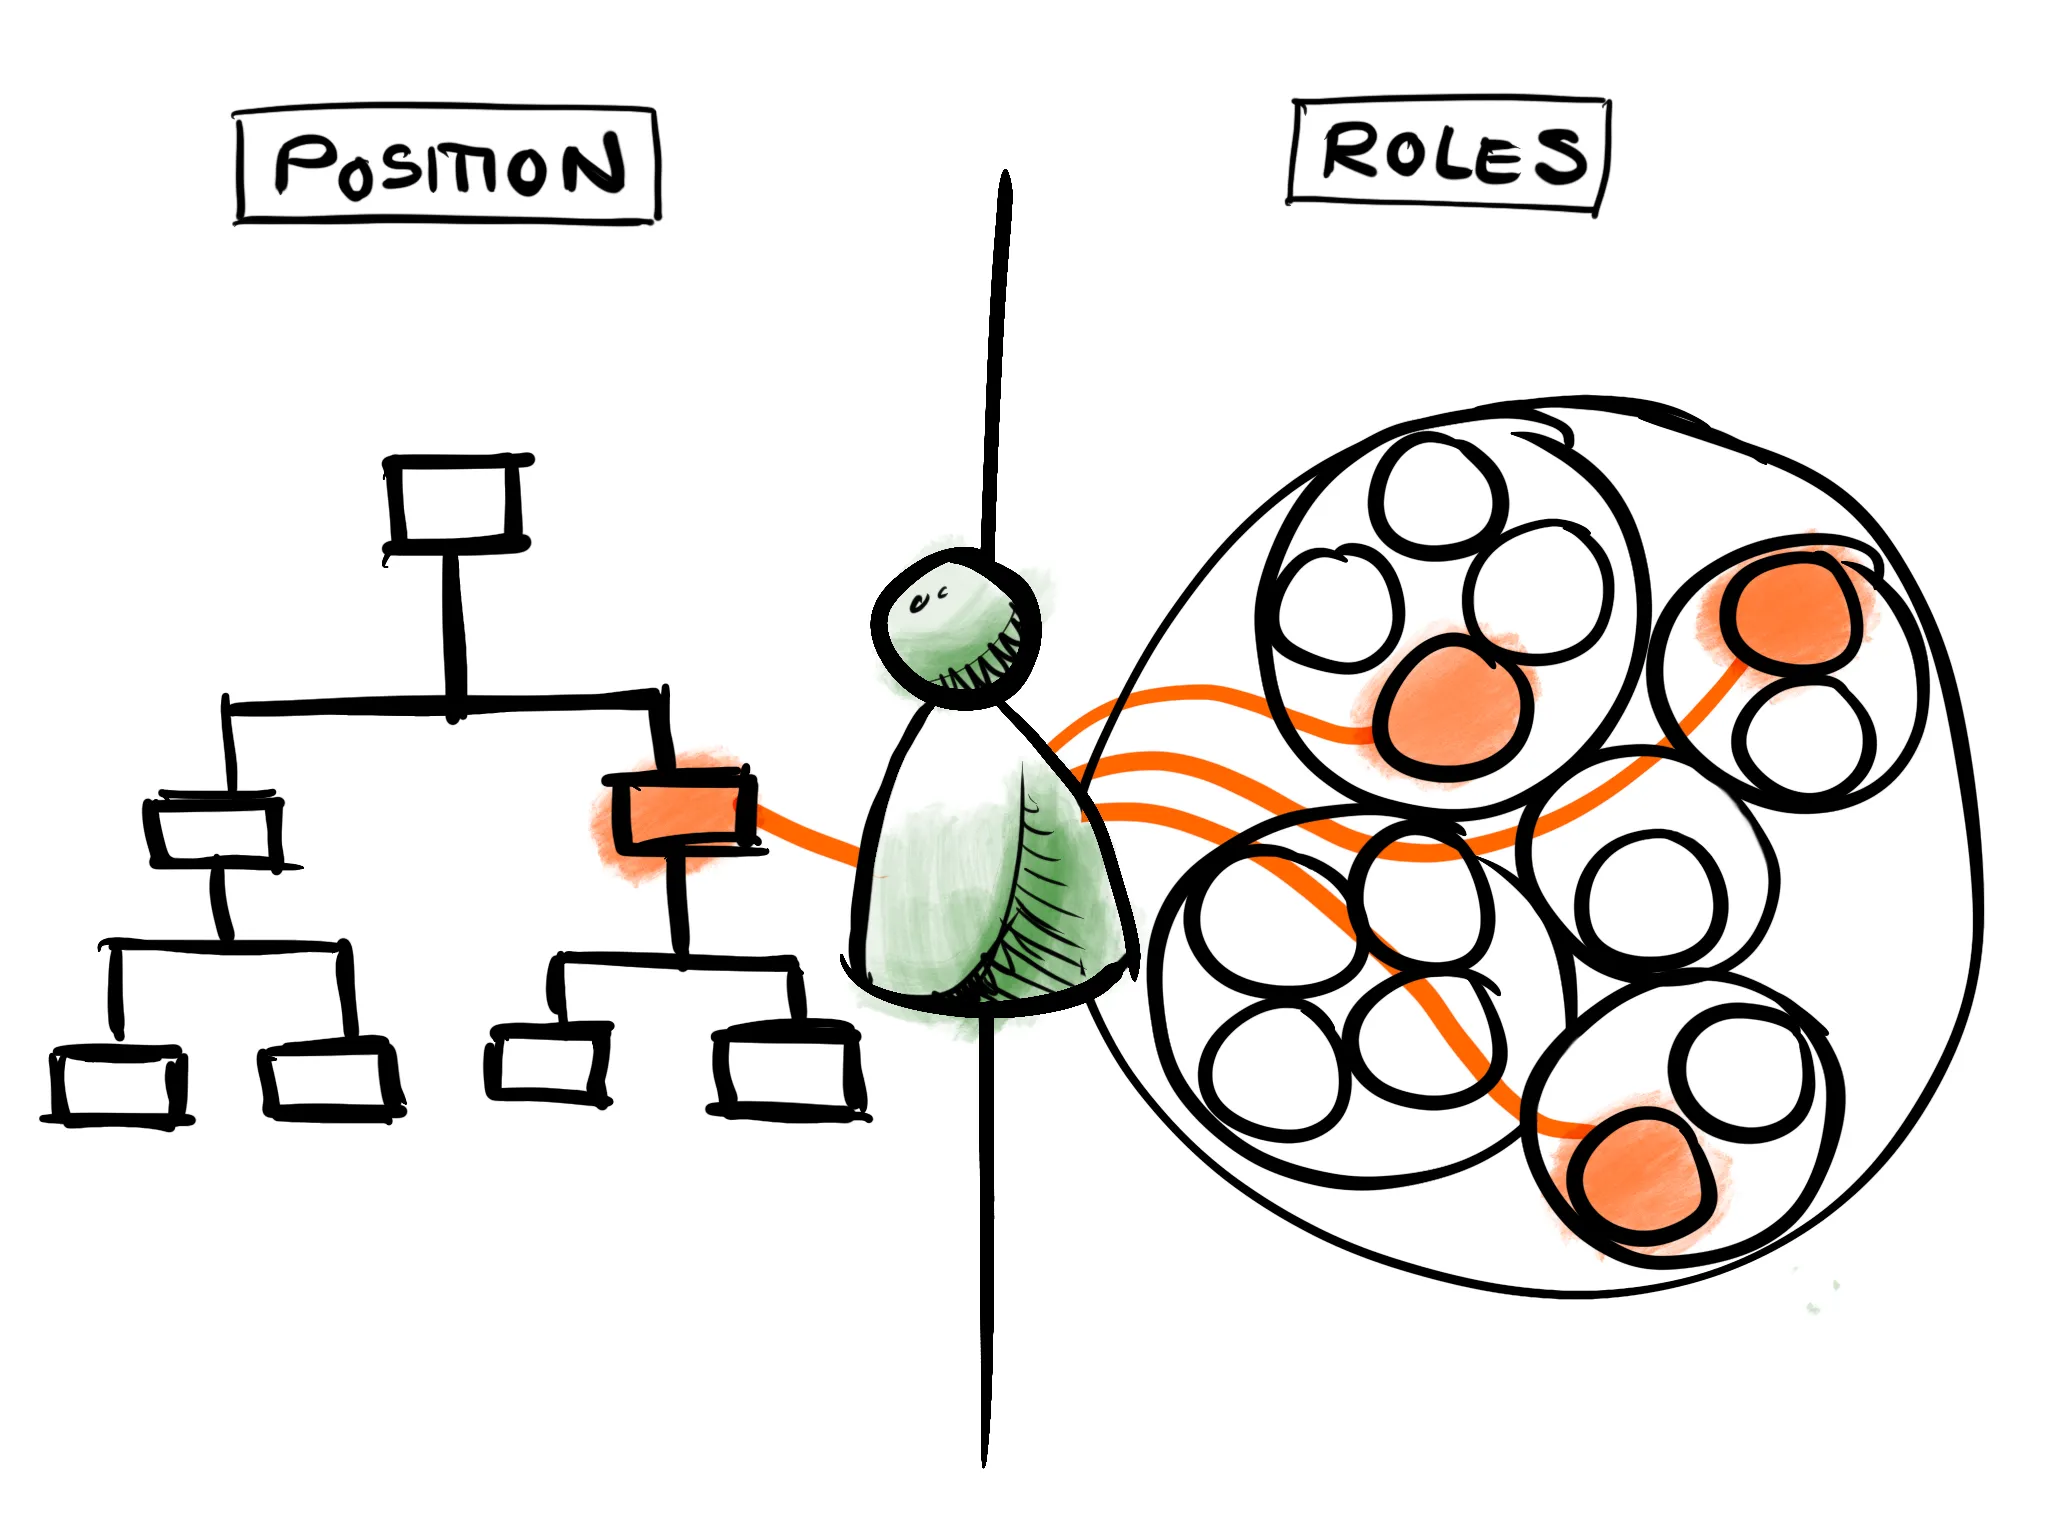 In a position-based organisation, an individual is situated in one position in the pyramid. In a role-based organisation, that same individual may instead hold roles on different teams across the entire organisation.